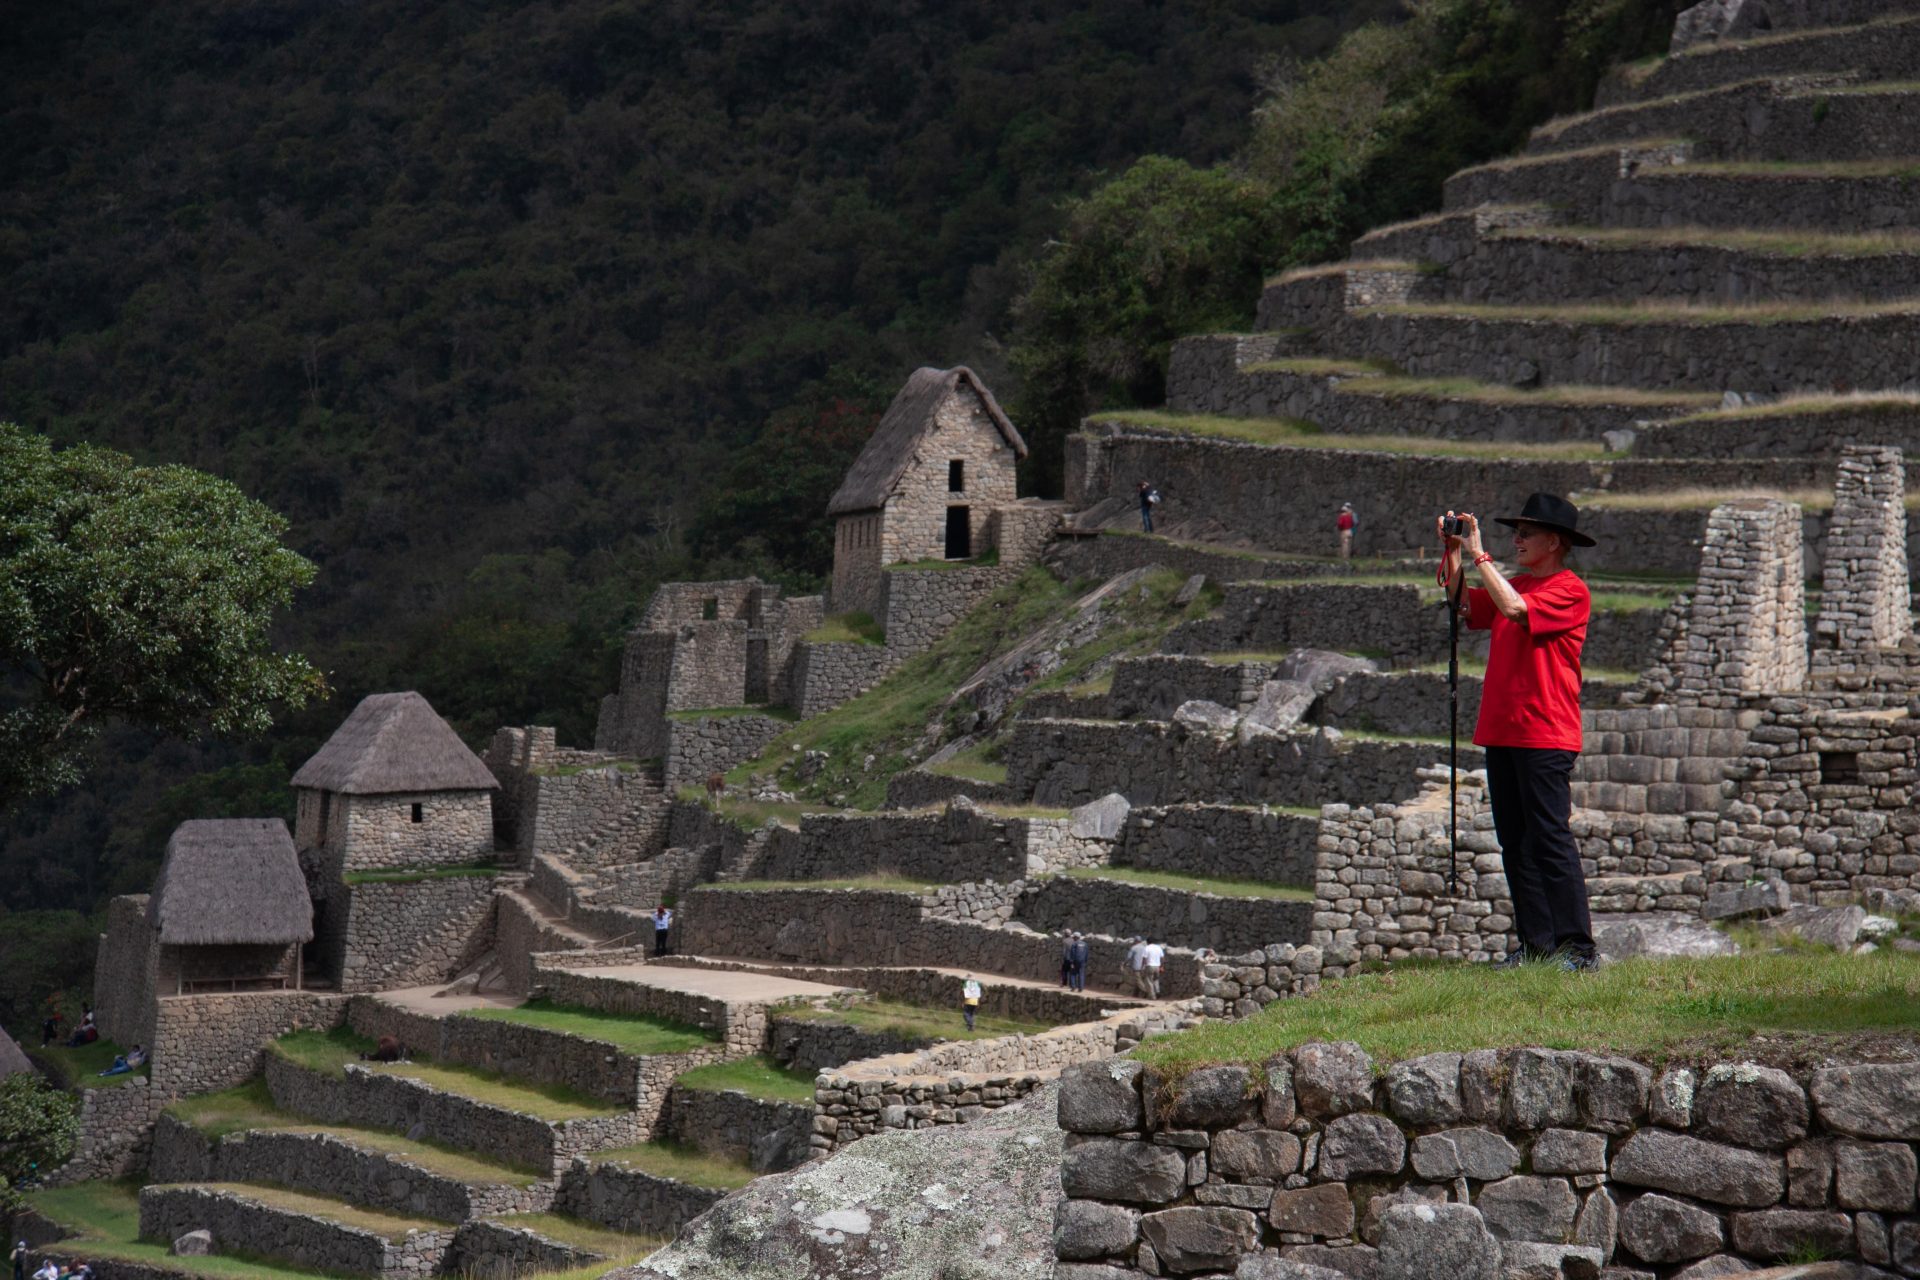 Sandi doing what she loved: travel and imagery.  2012 Machu Pichu